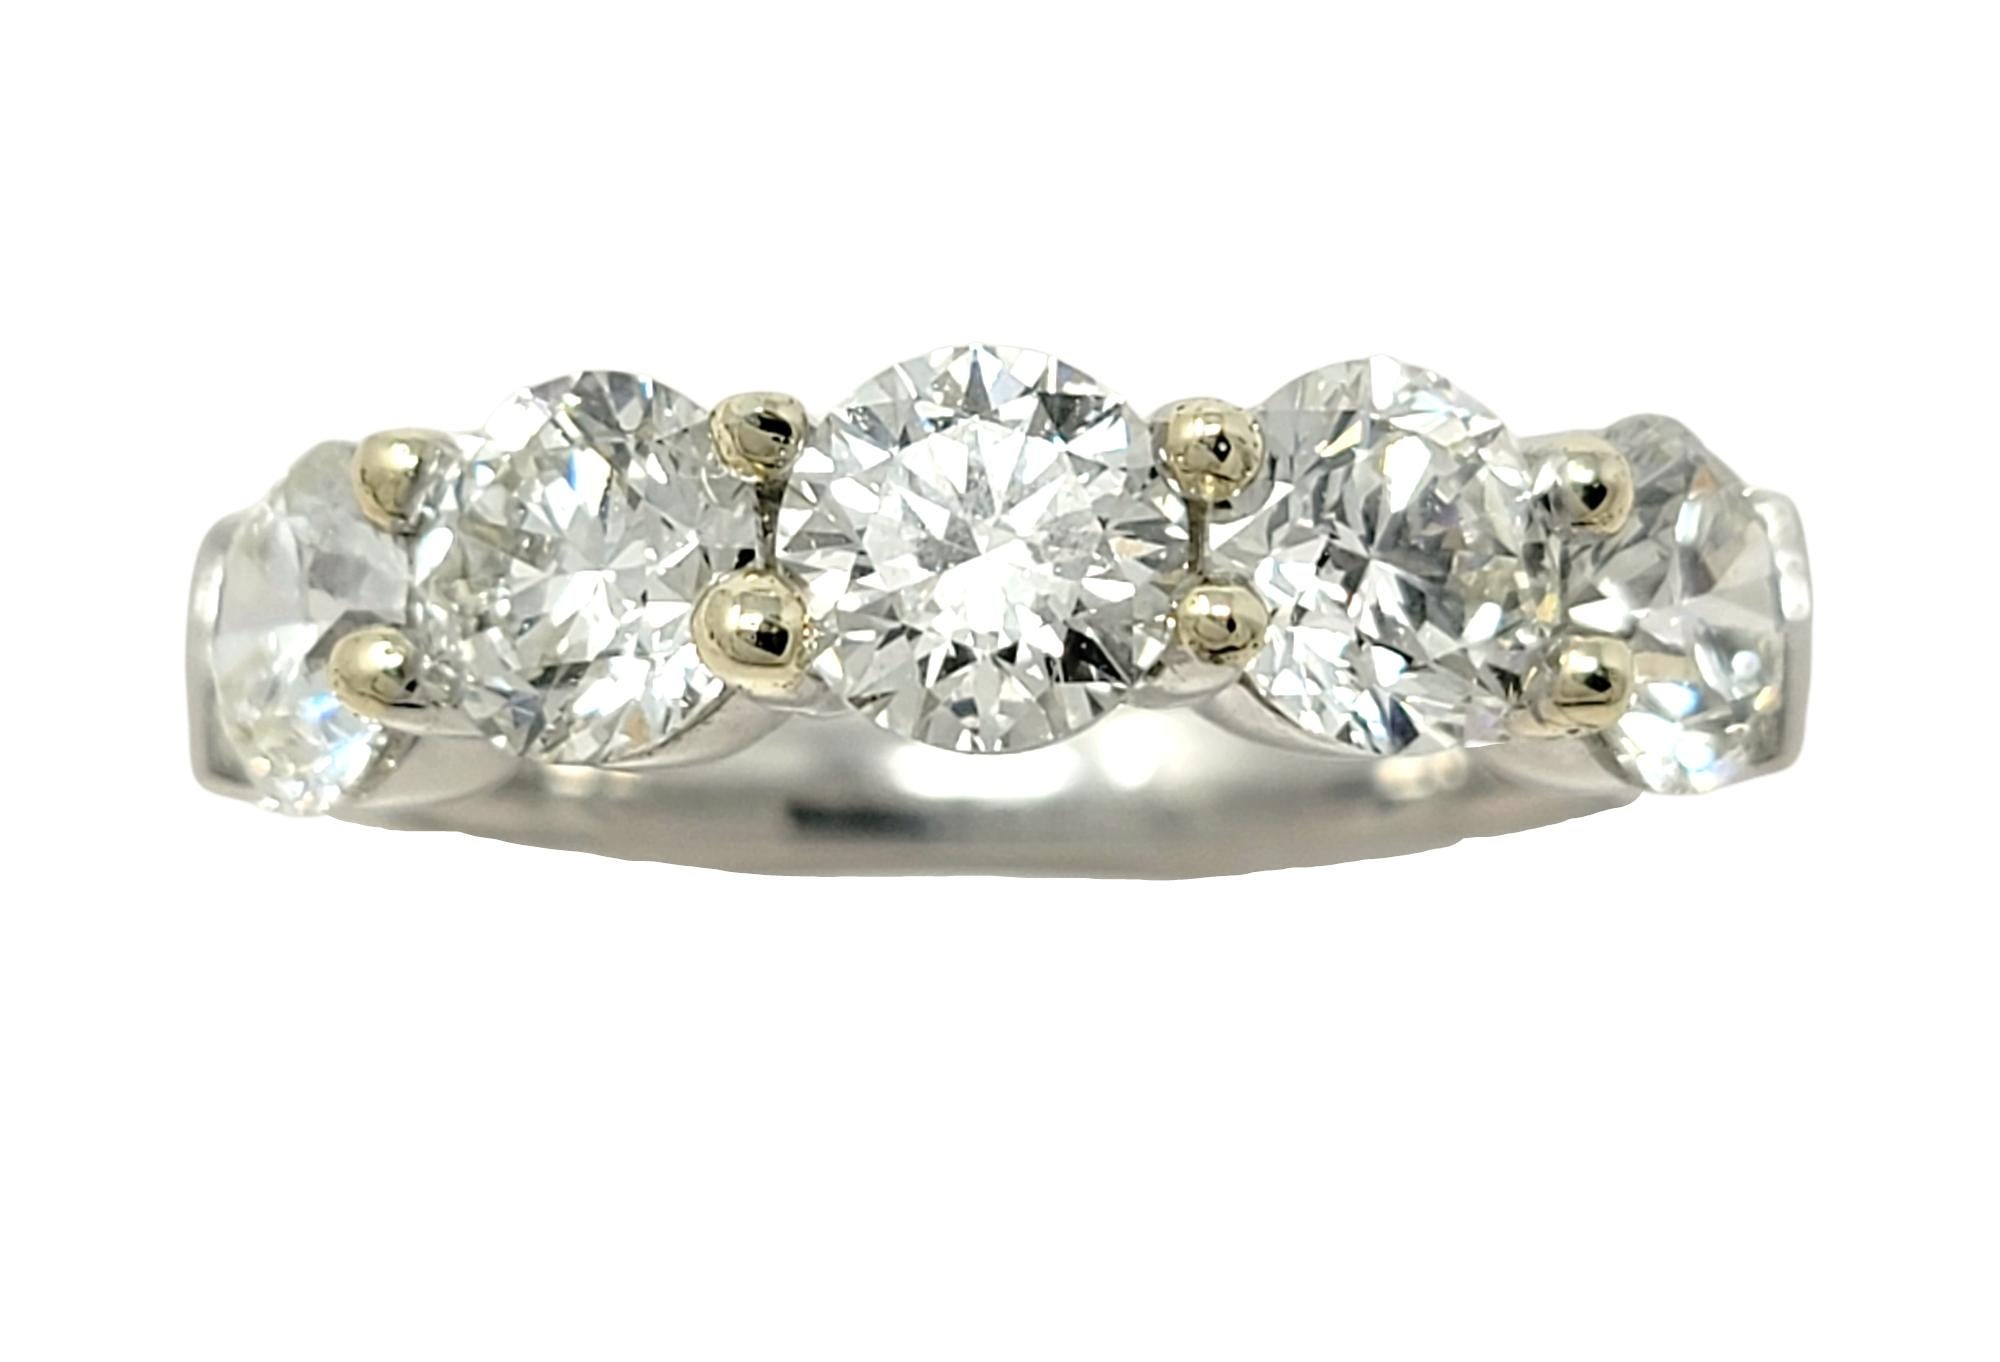 Ring size: 7

Stunningly sparkly diamond and platinum semi-eternity band ring. This timeless beauty features 5 sizeable icy white round diamonds prong set in platinum with yellow gold tips along the top half of the ring. The natural stones are